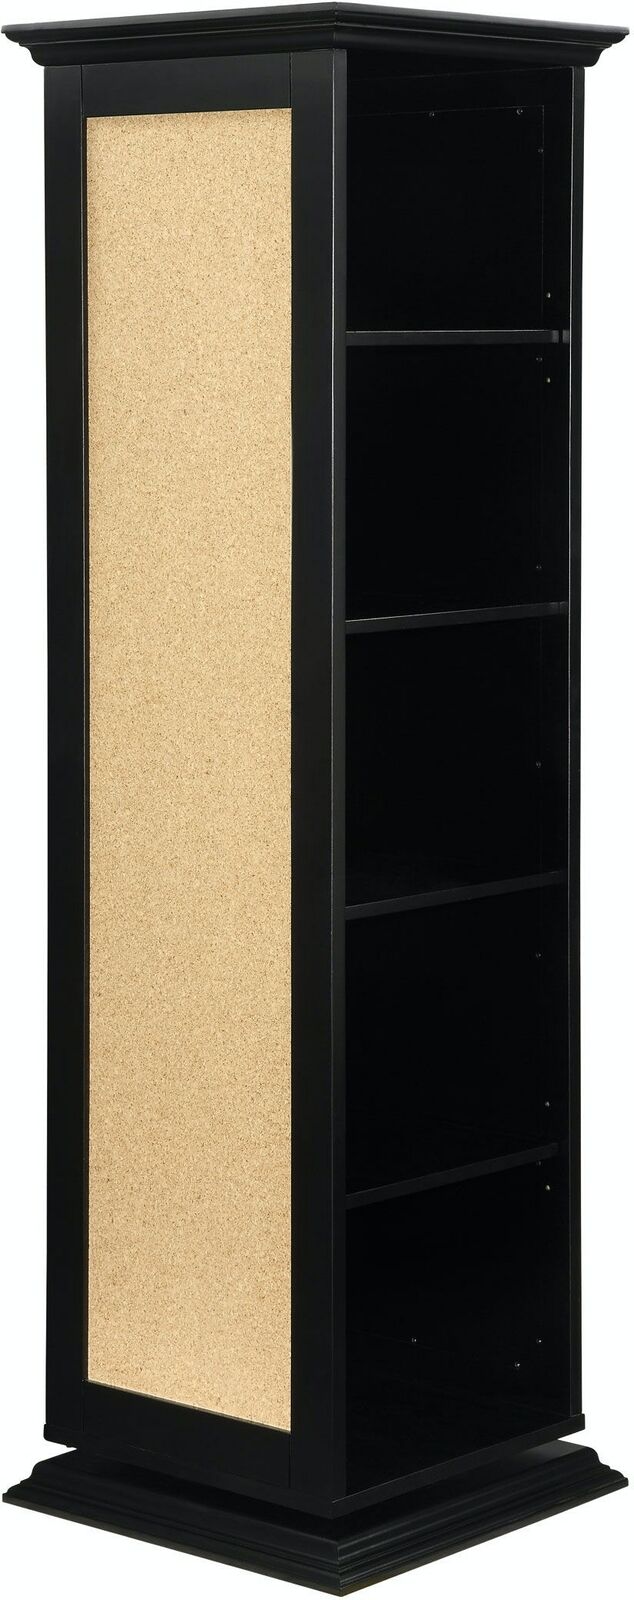 Swivel Accent Rotating Cabinet With Cork Board And Dressing Mirror Shelves Black